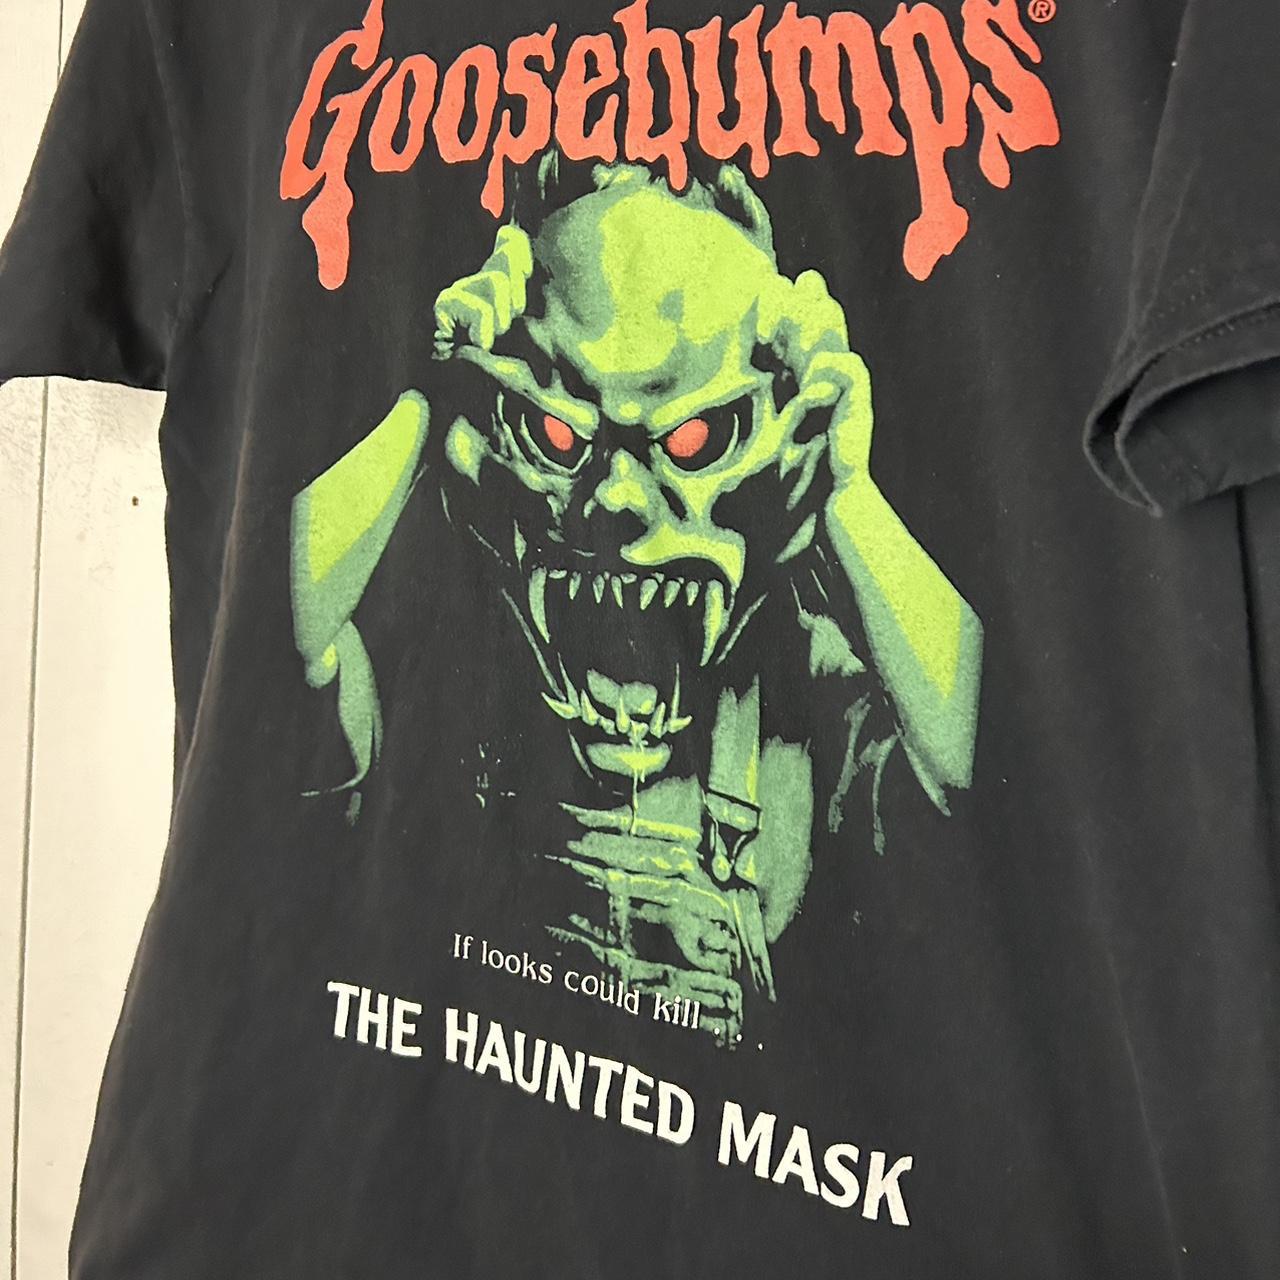 If looks could kill goosebumps t shirt. Tagged a... - Depop